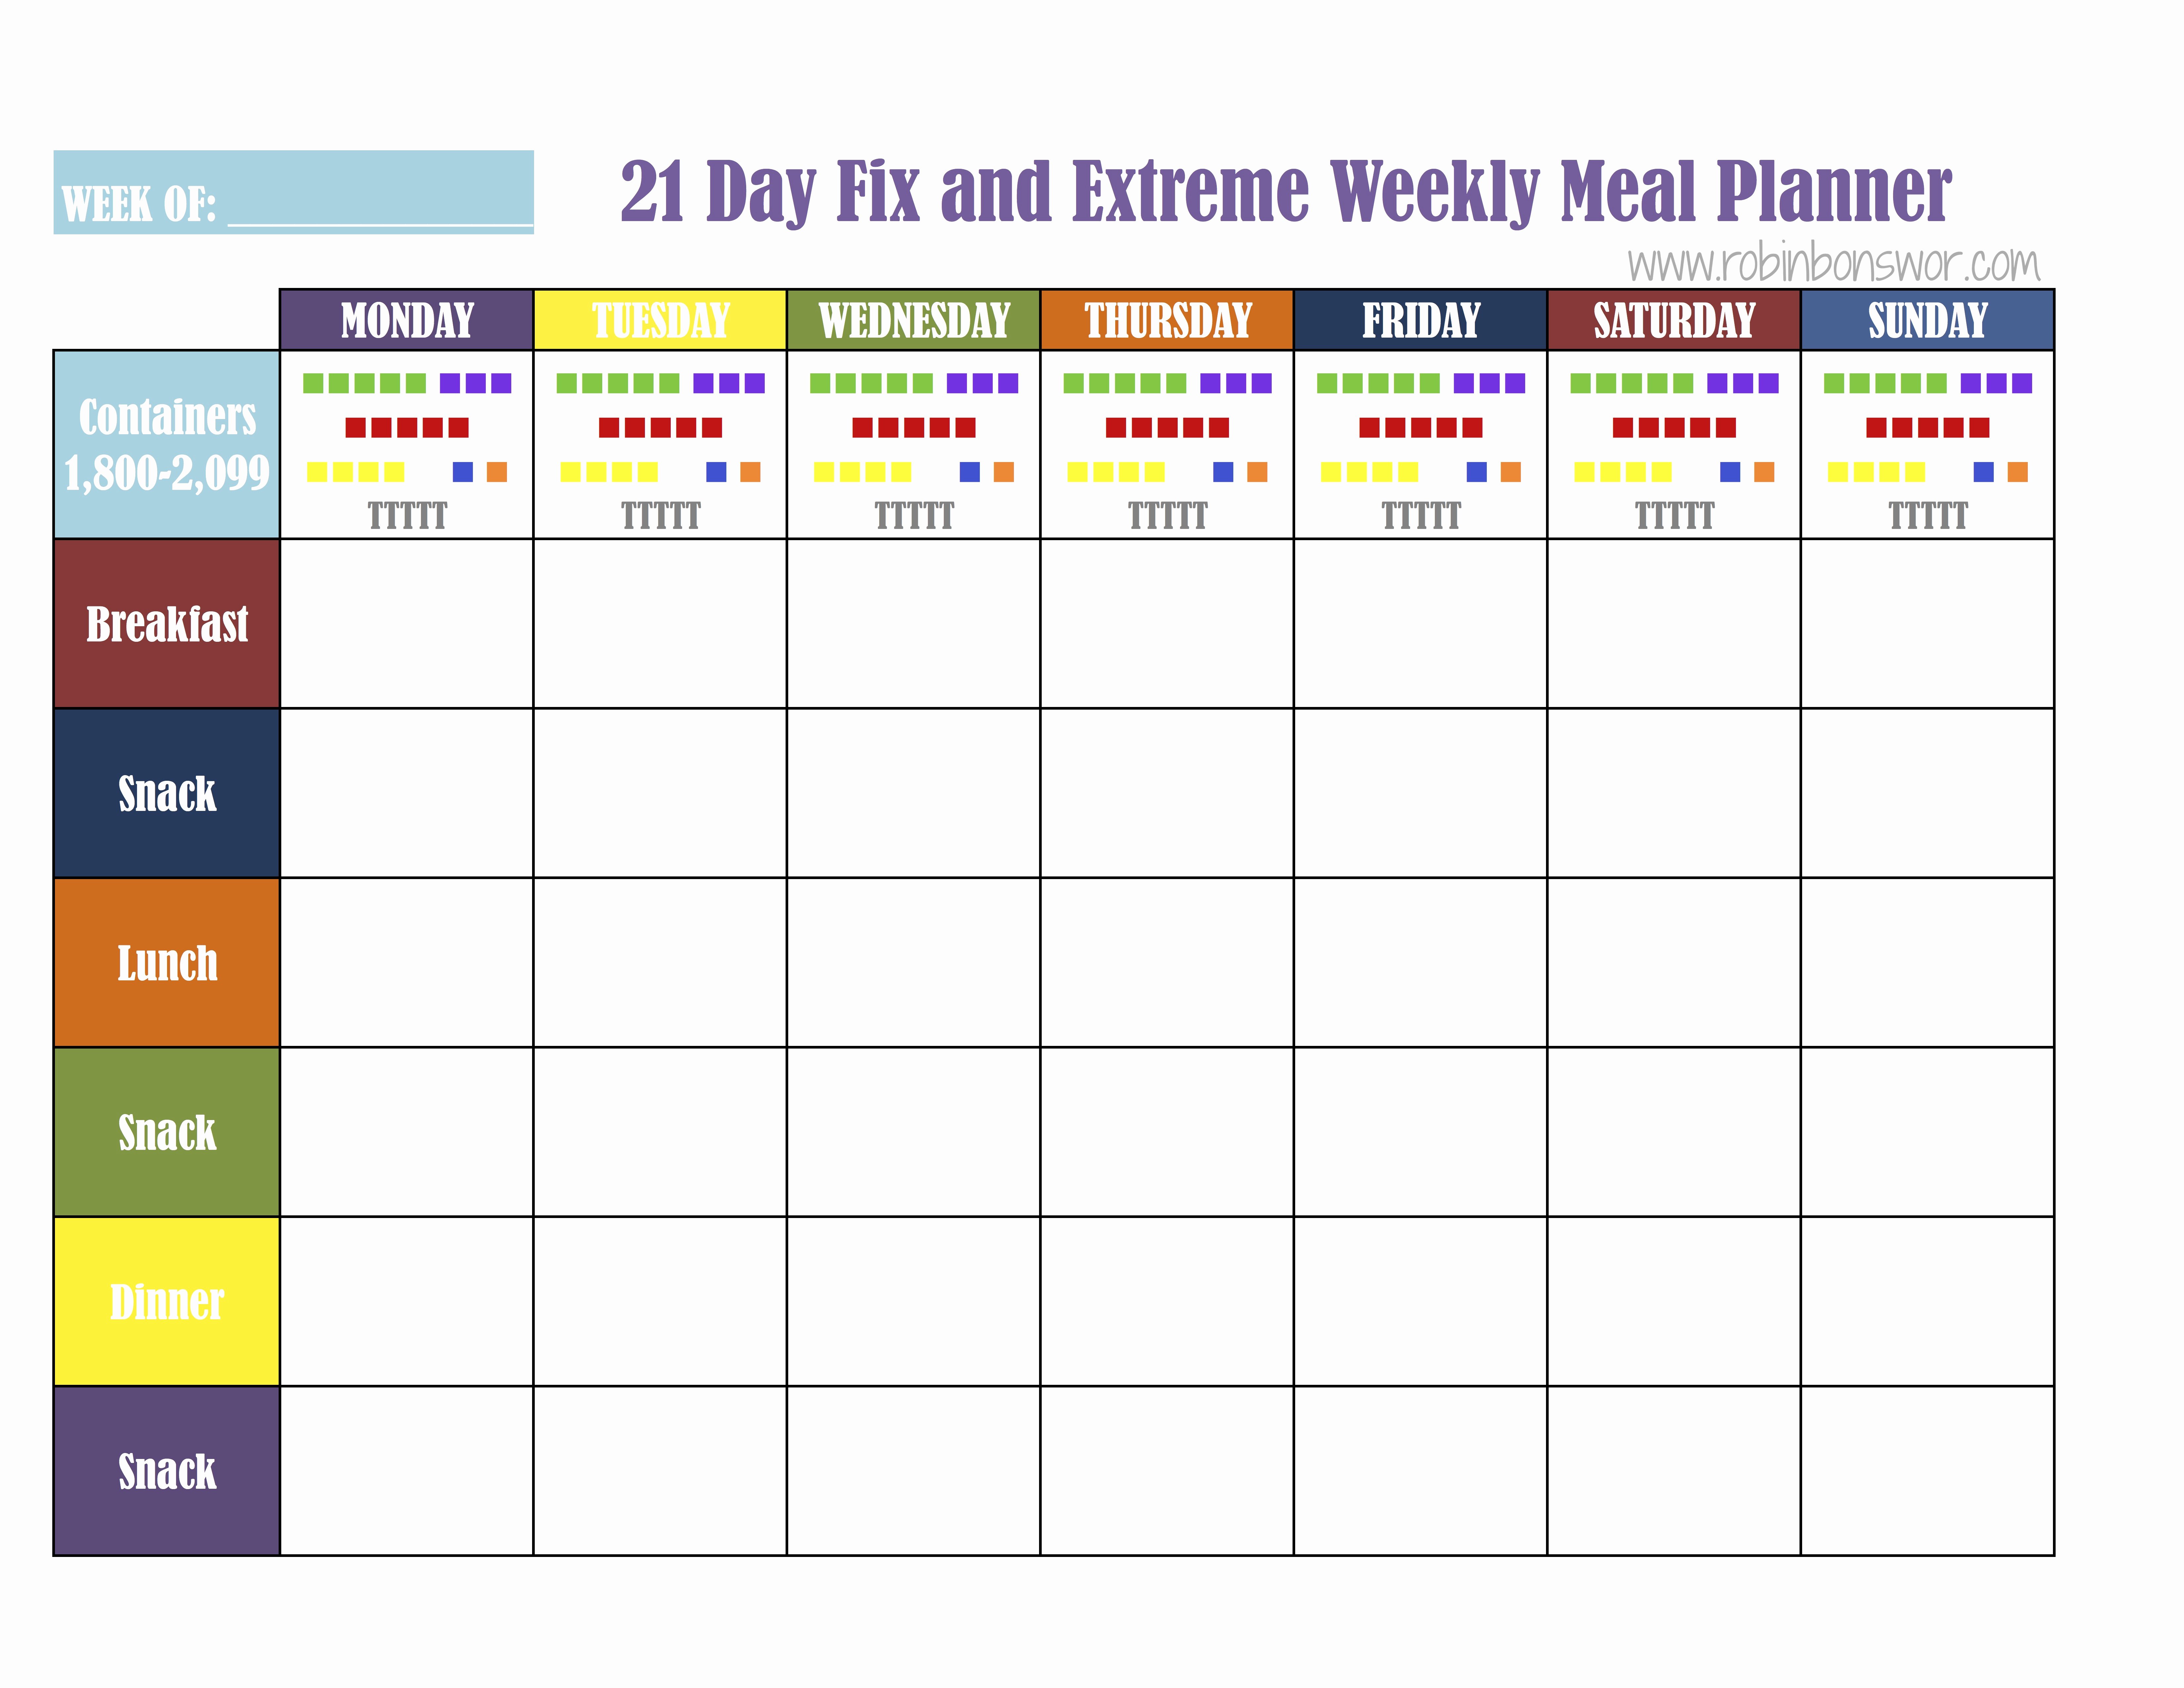 21 Day Fix Meal Plan tools